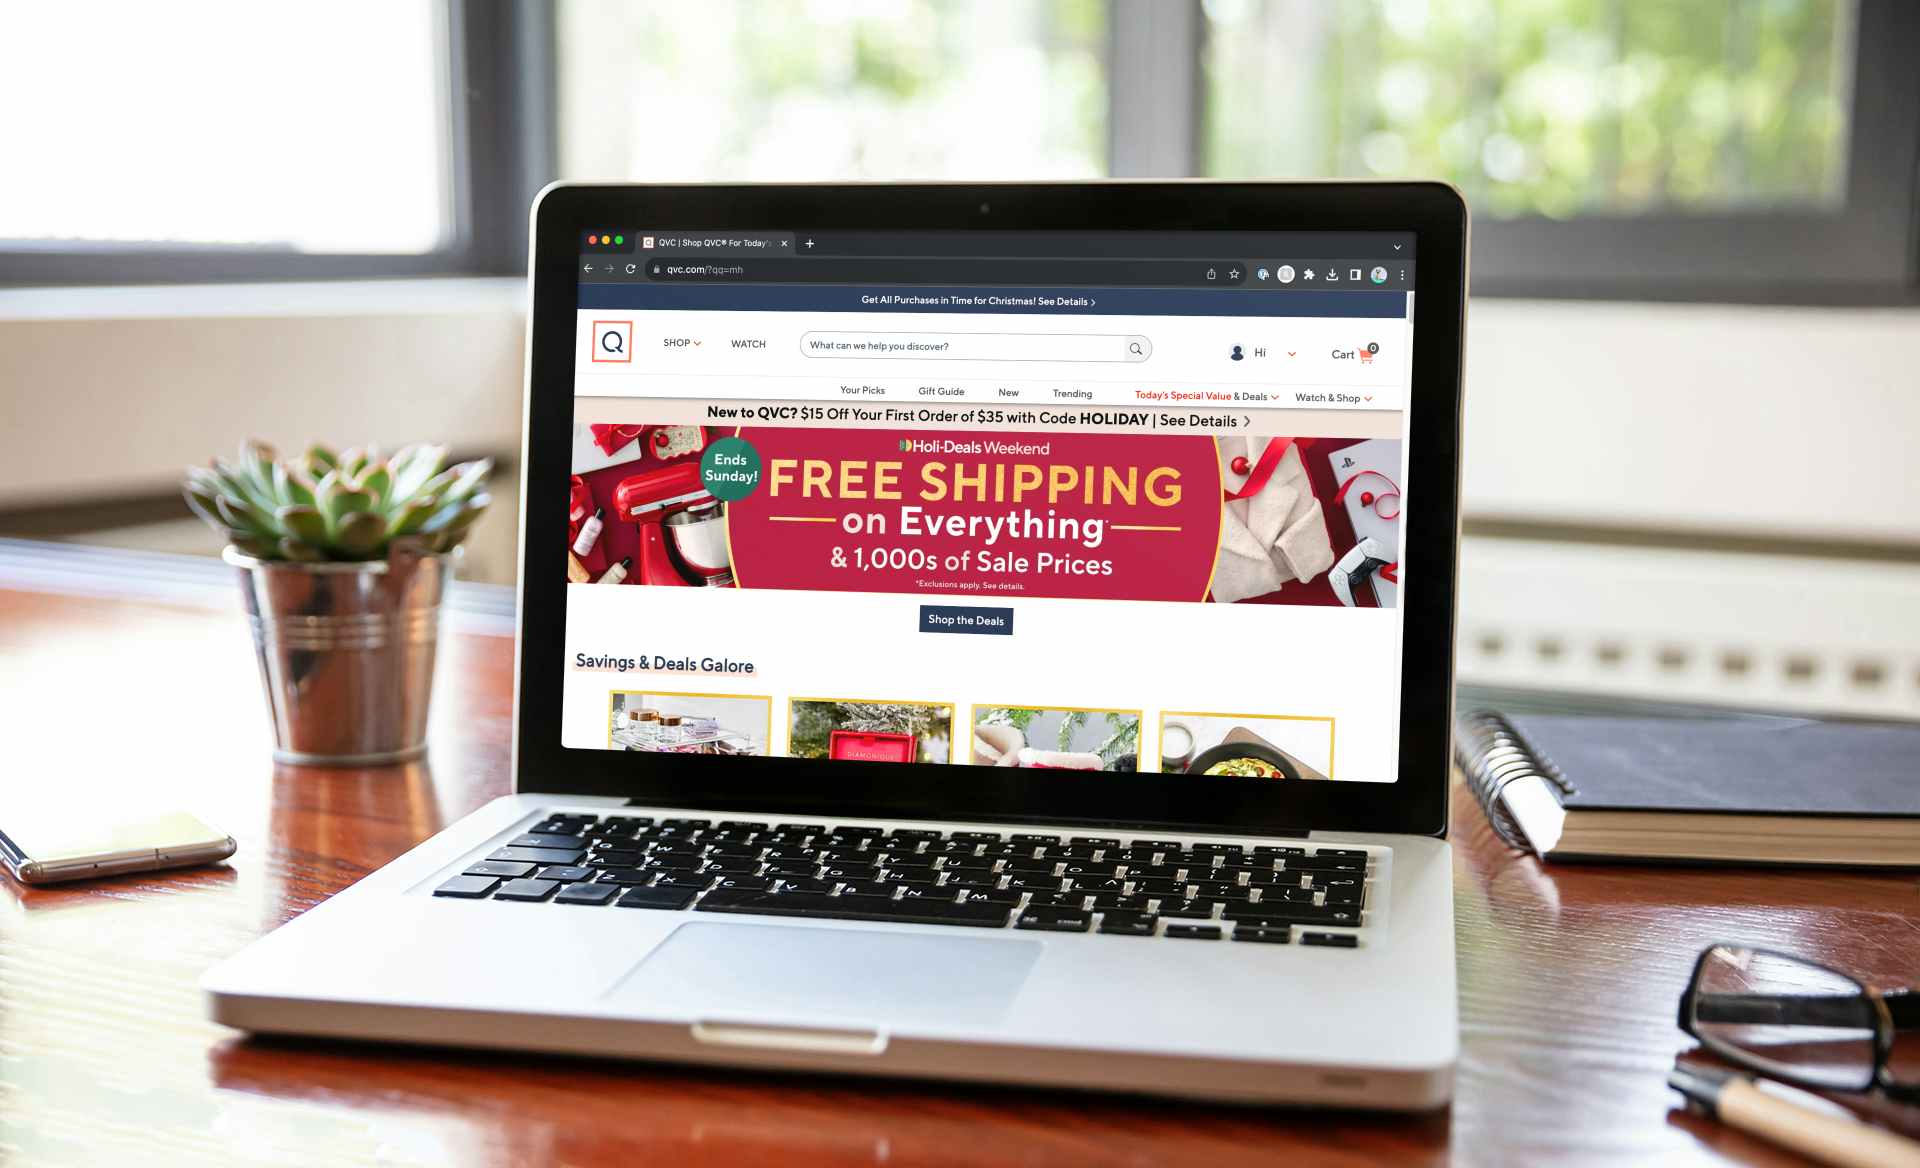 the QVC website advertising a free shipping weekend